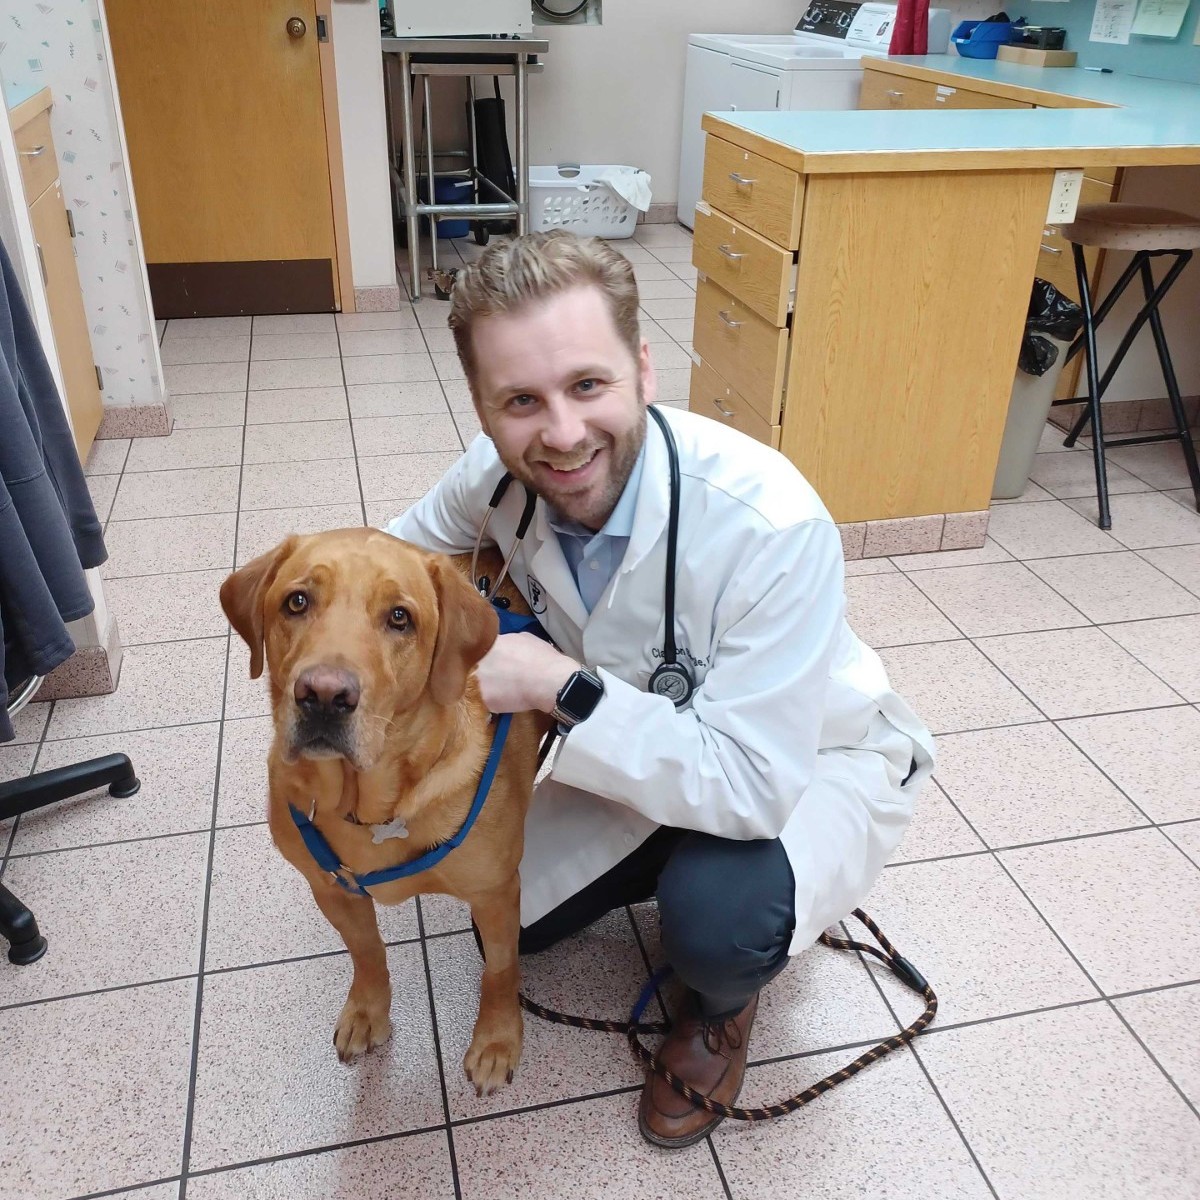 Dr. Siegle poses with Morgan after Morgan's TPLO surgery.